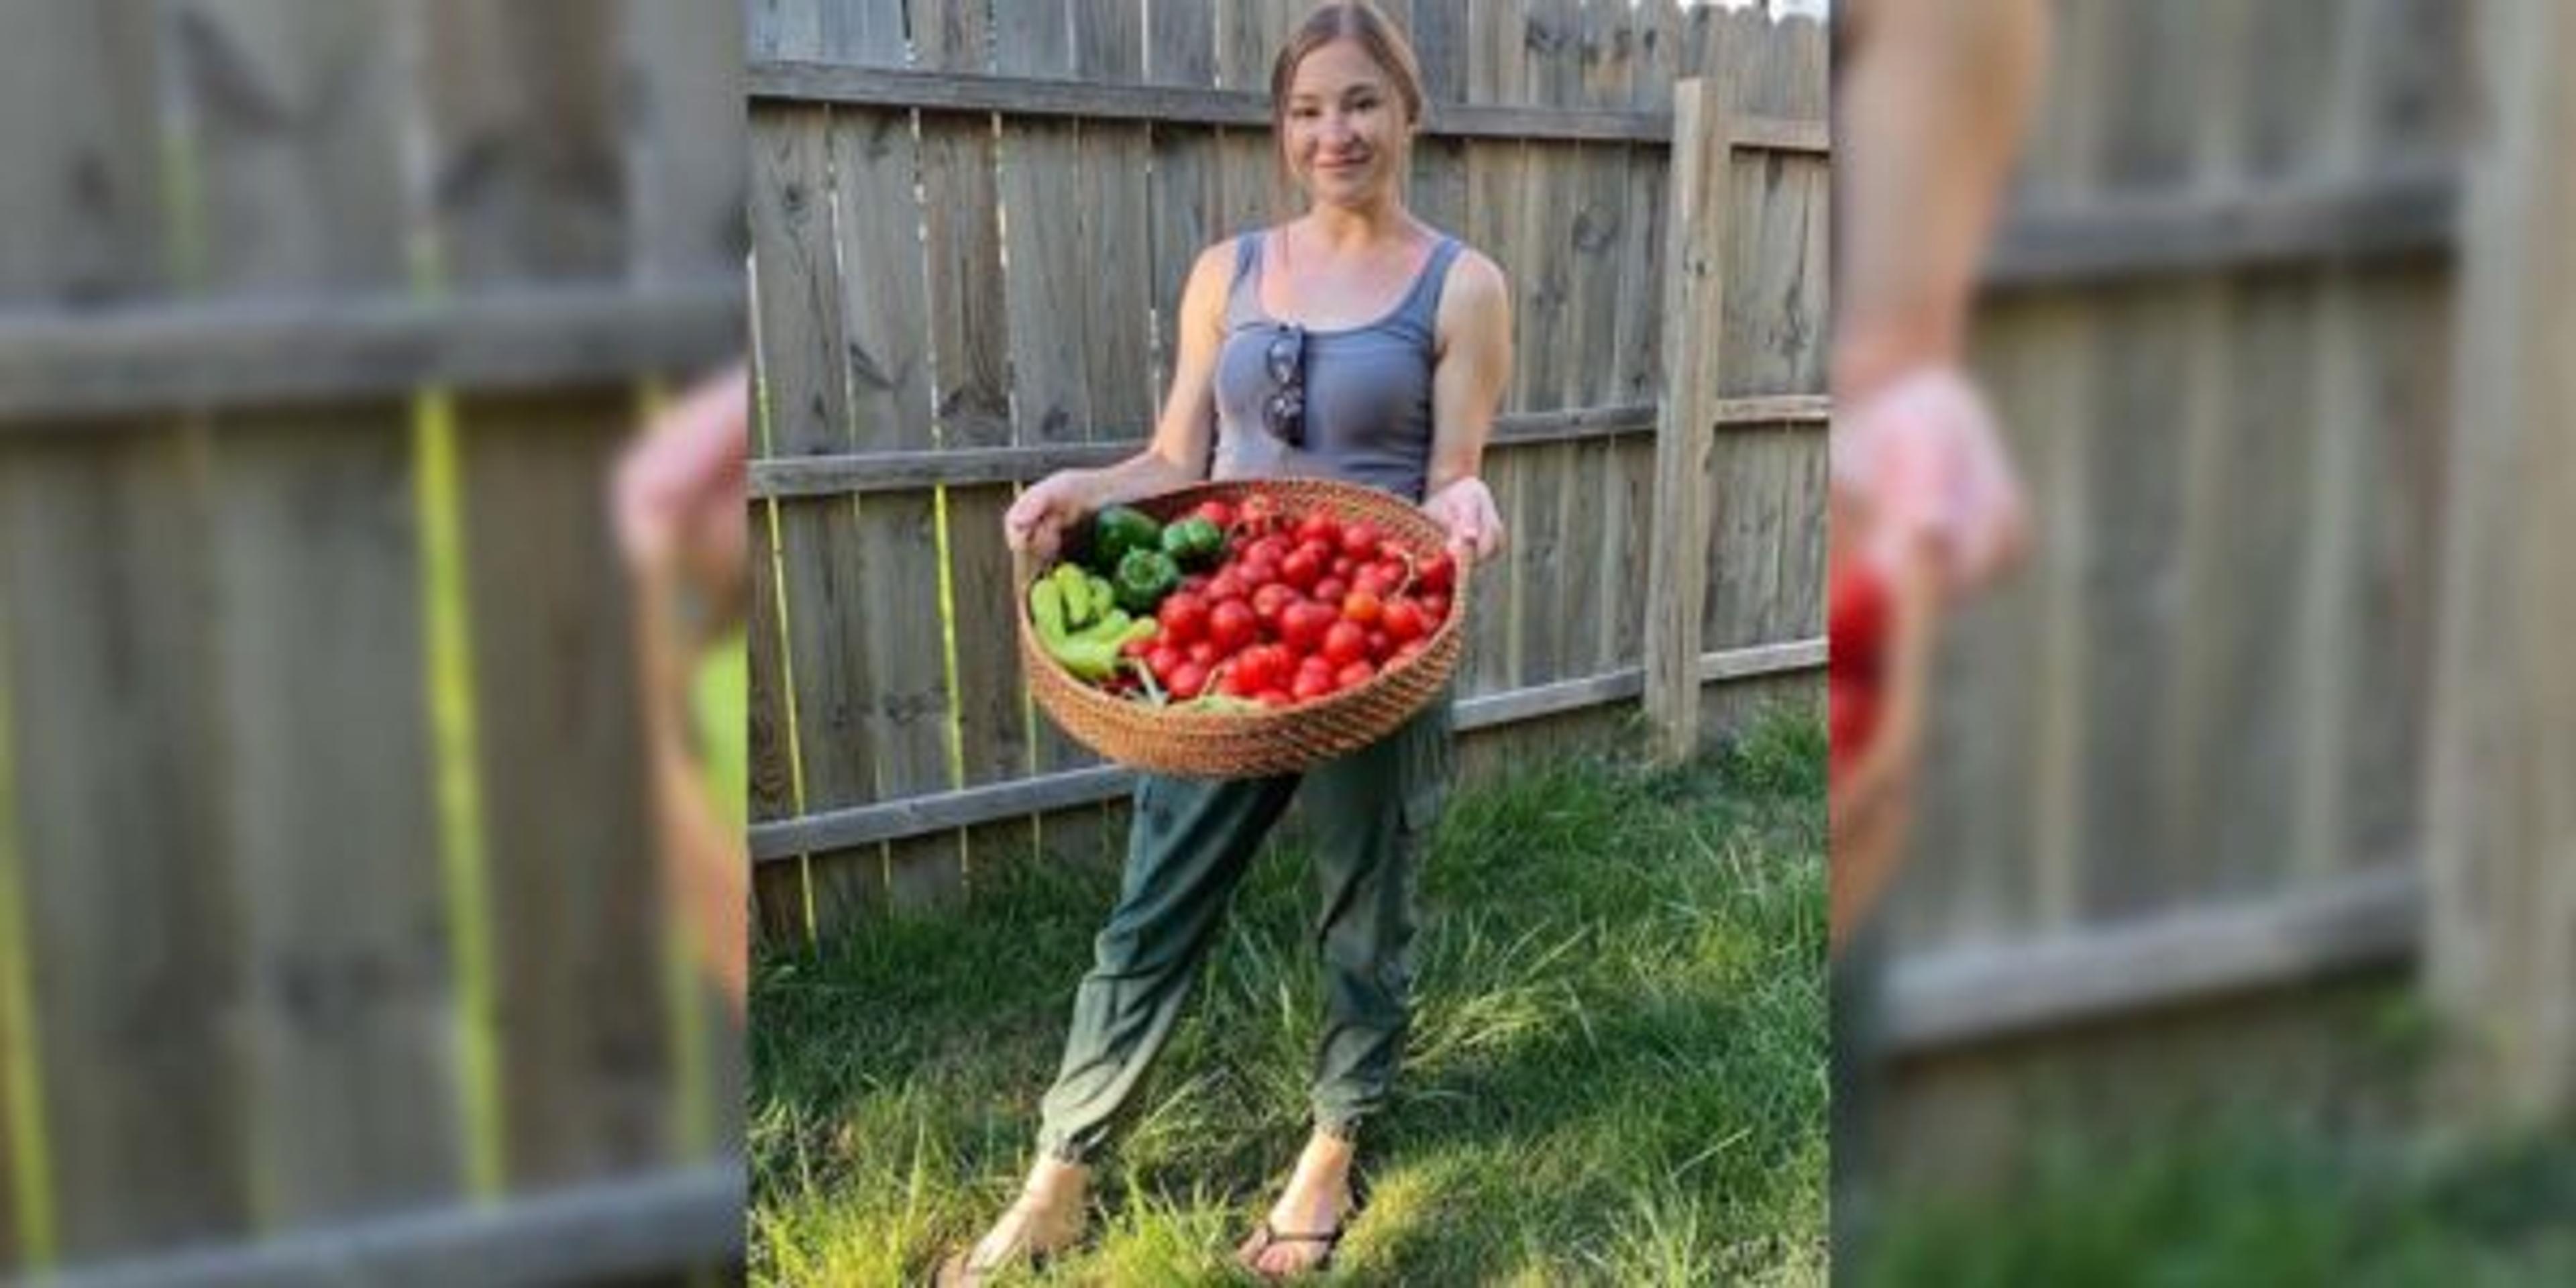 Mia poses with a basket full of tomatoes from her garden